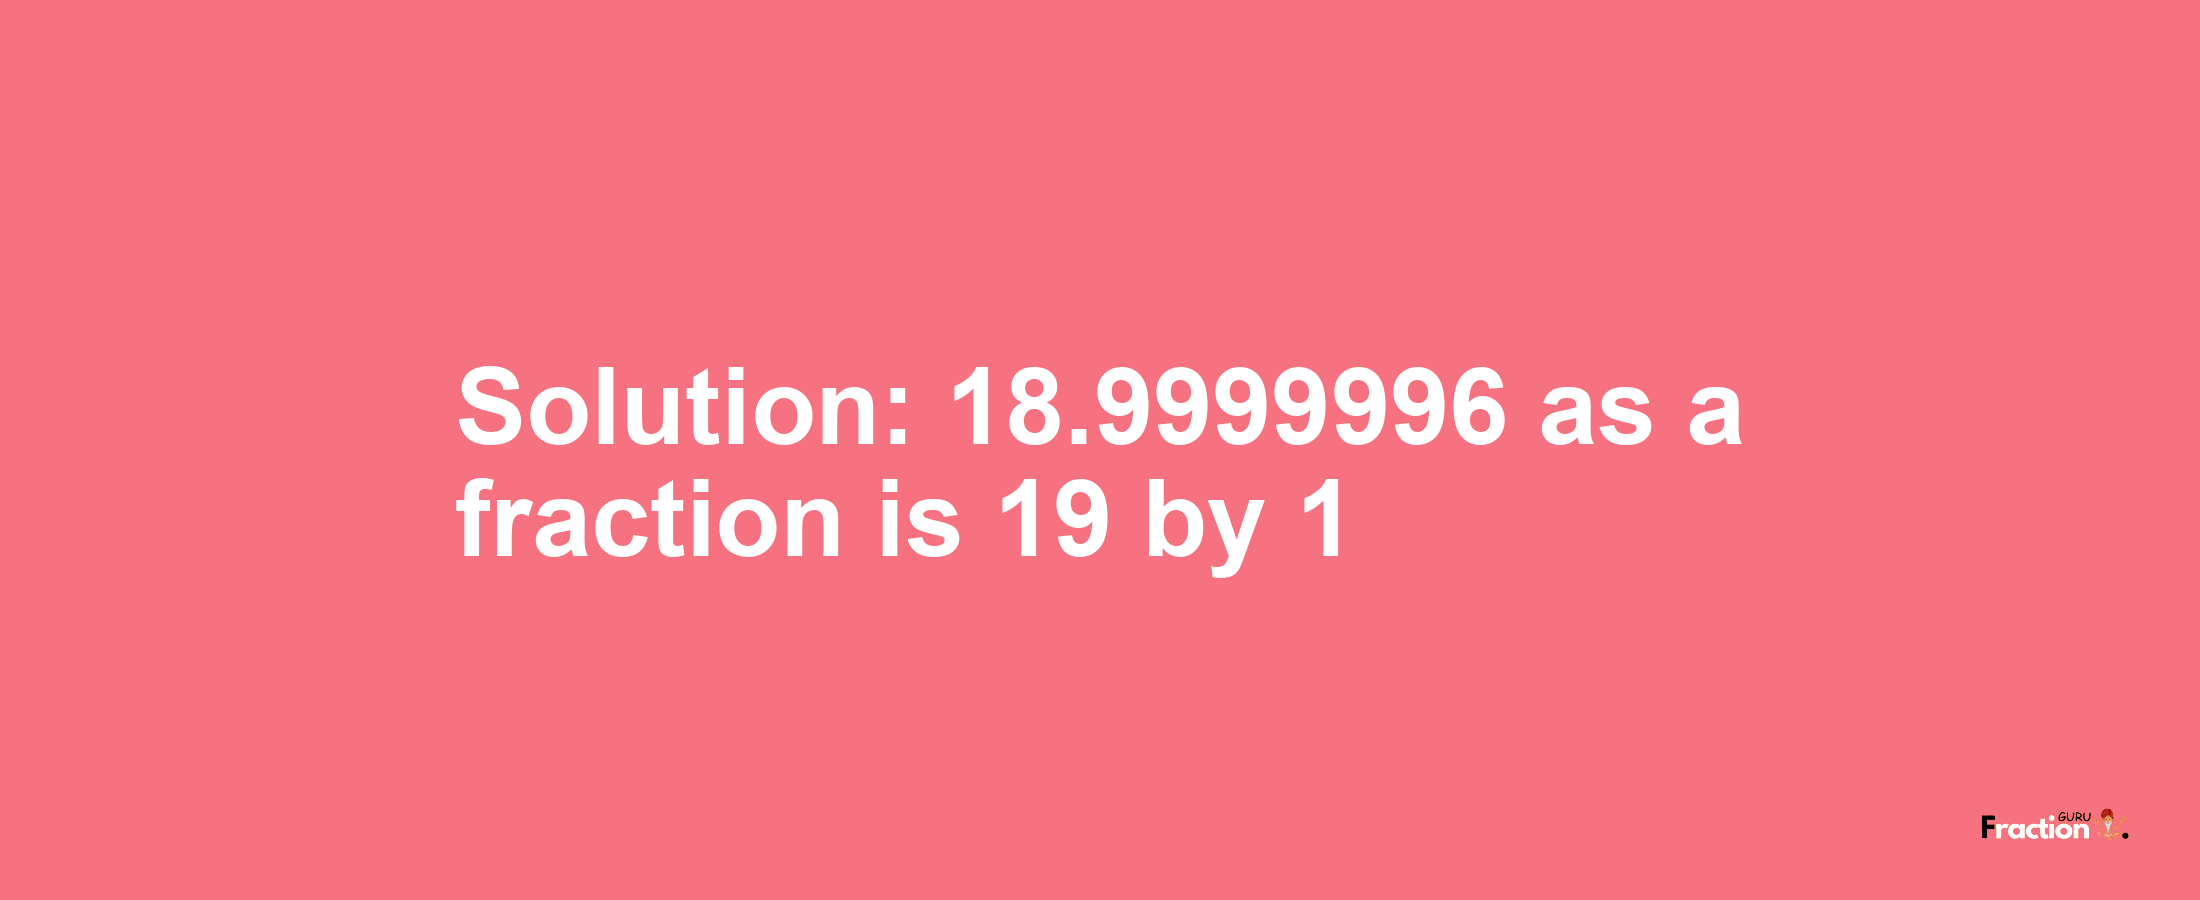 Solution:18.9999996 as a fraction is 19/1